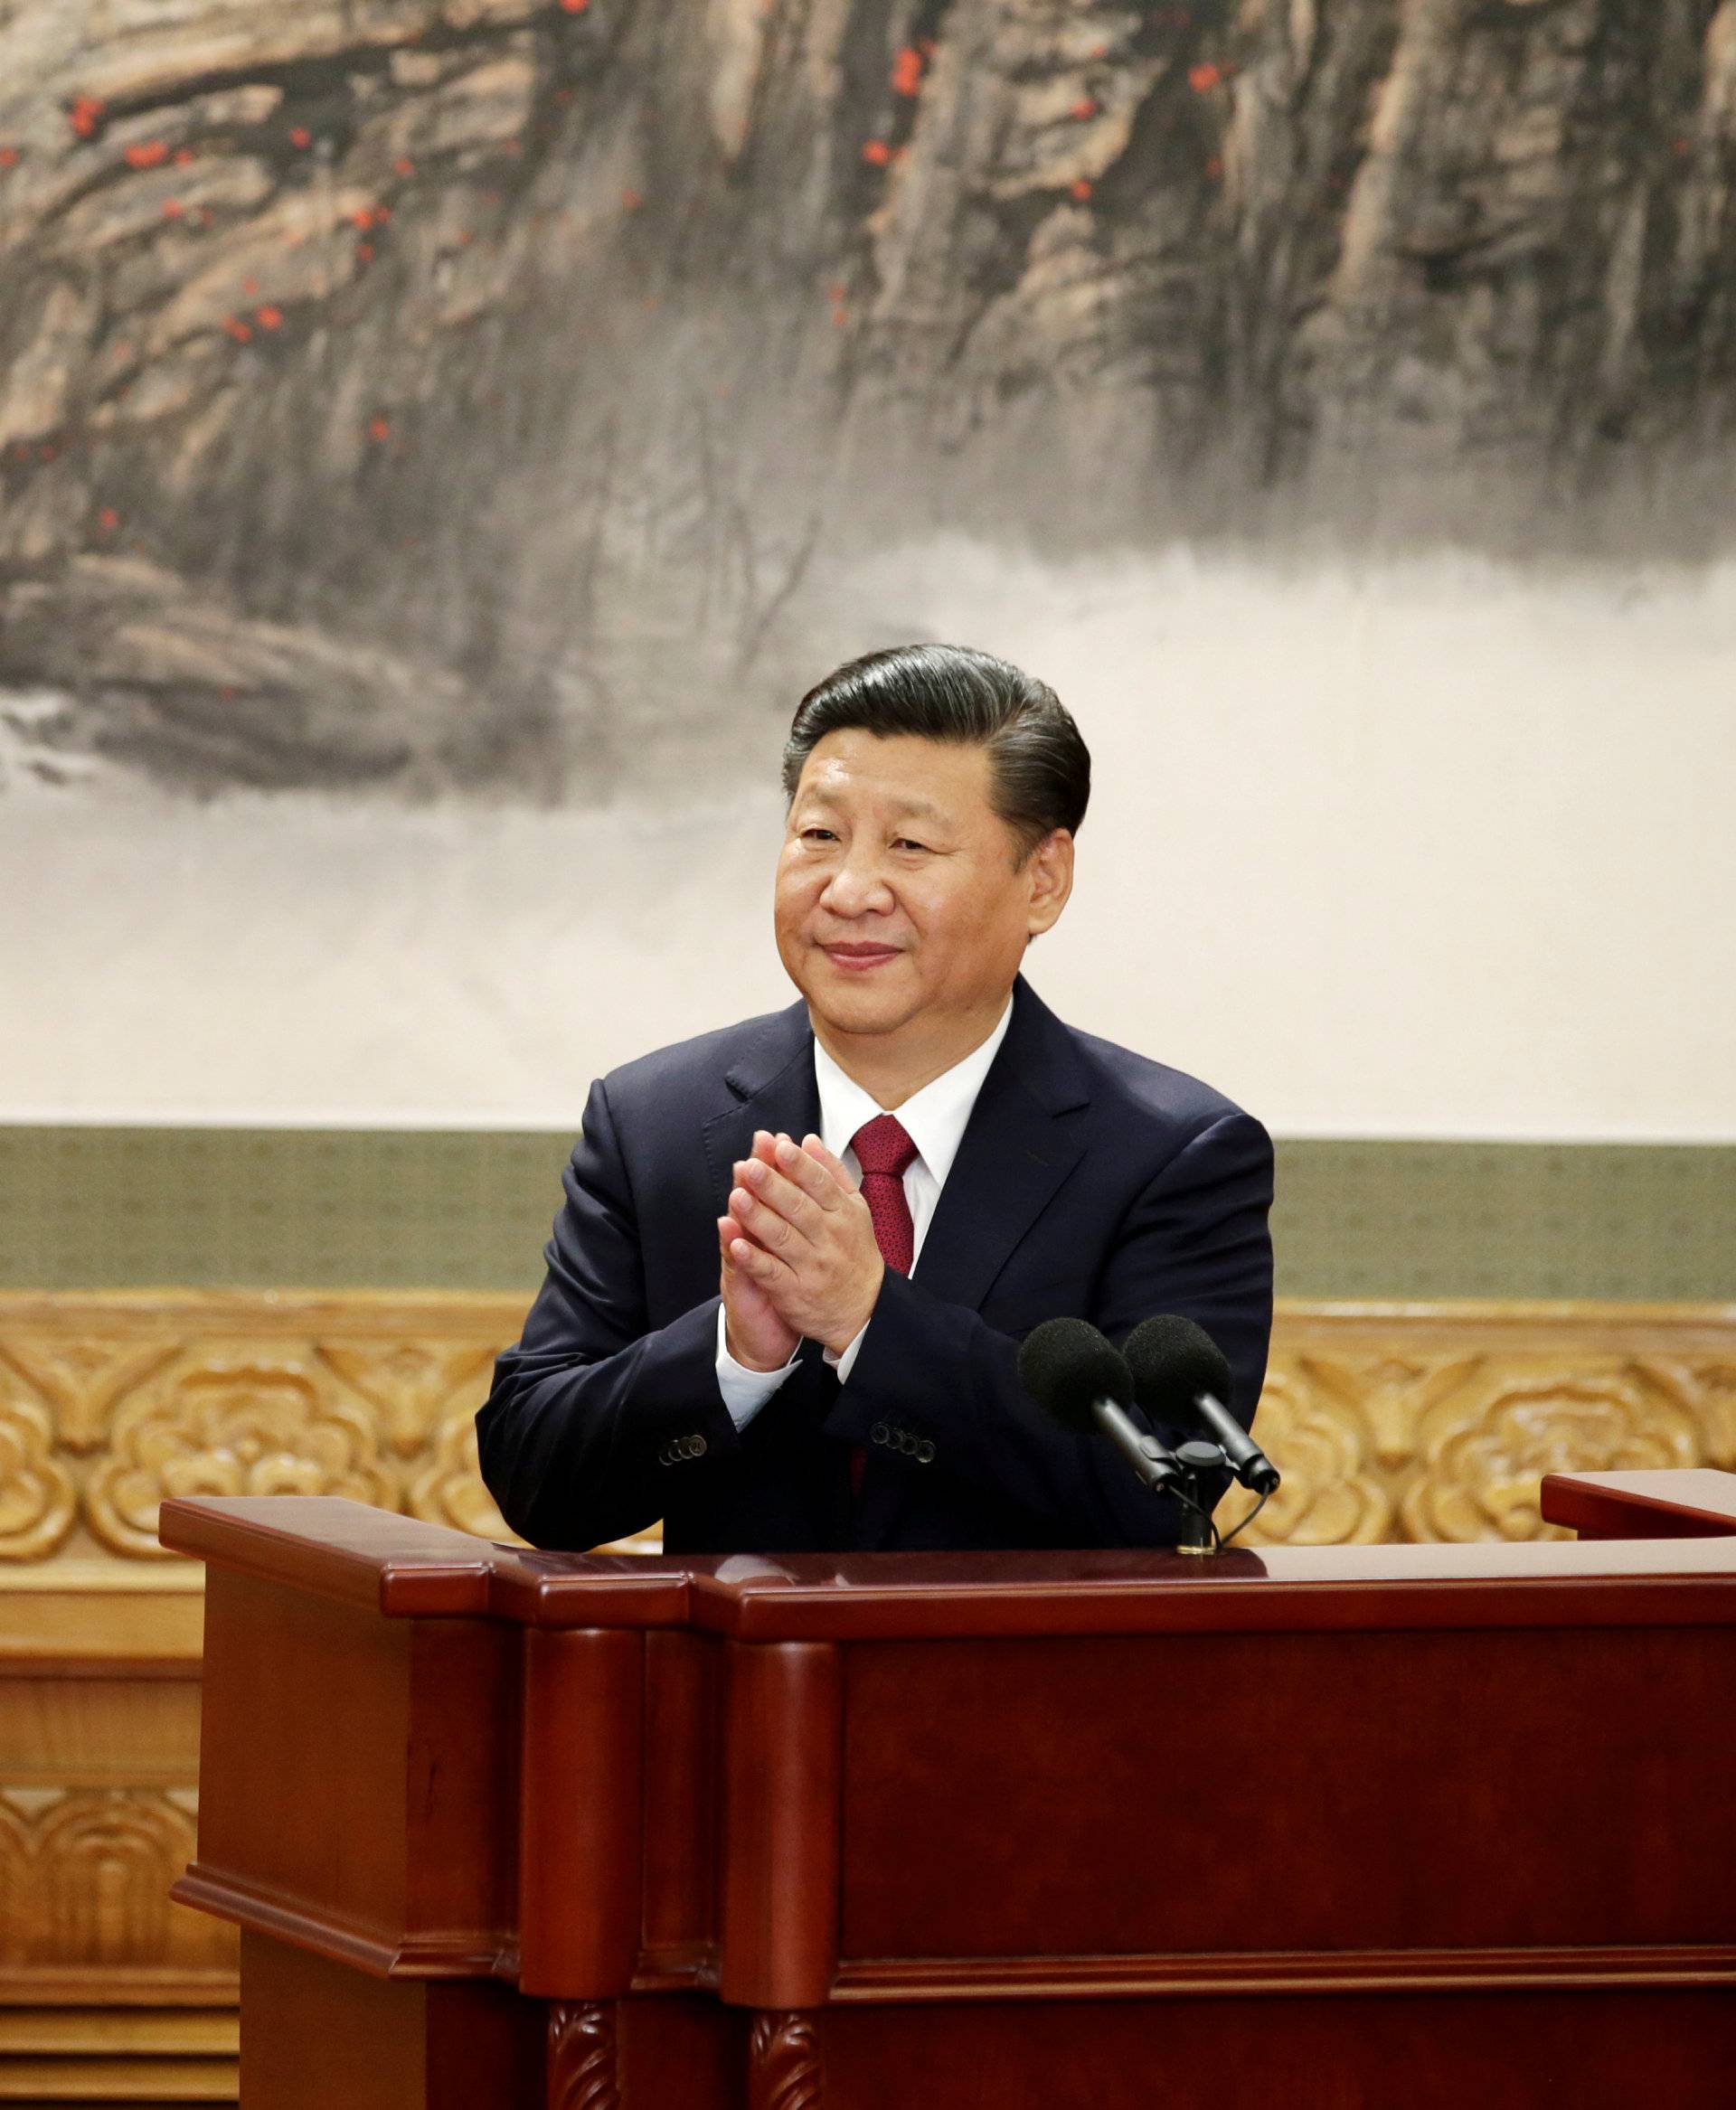 FILE PHOTO: Chinese President Xi Jinping claps after his speech as China's new Politburo Standing Committee members meet with the press at the Great Hall of the People in Beijing